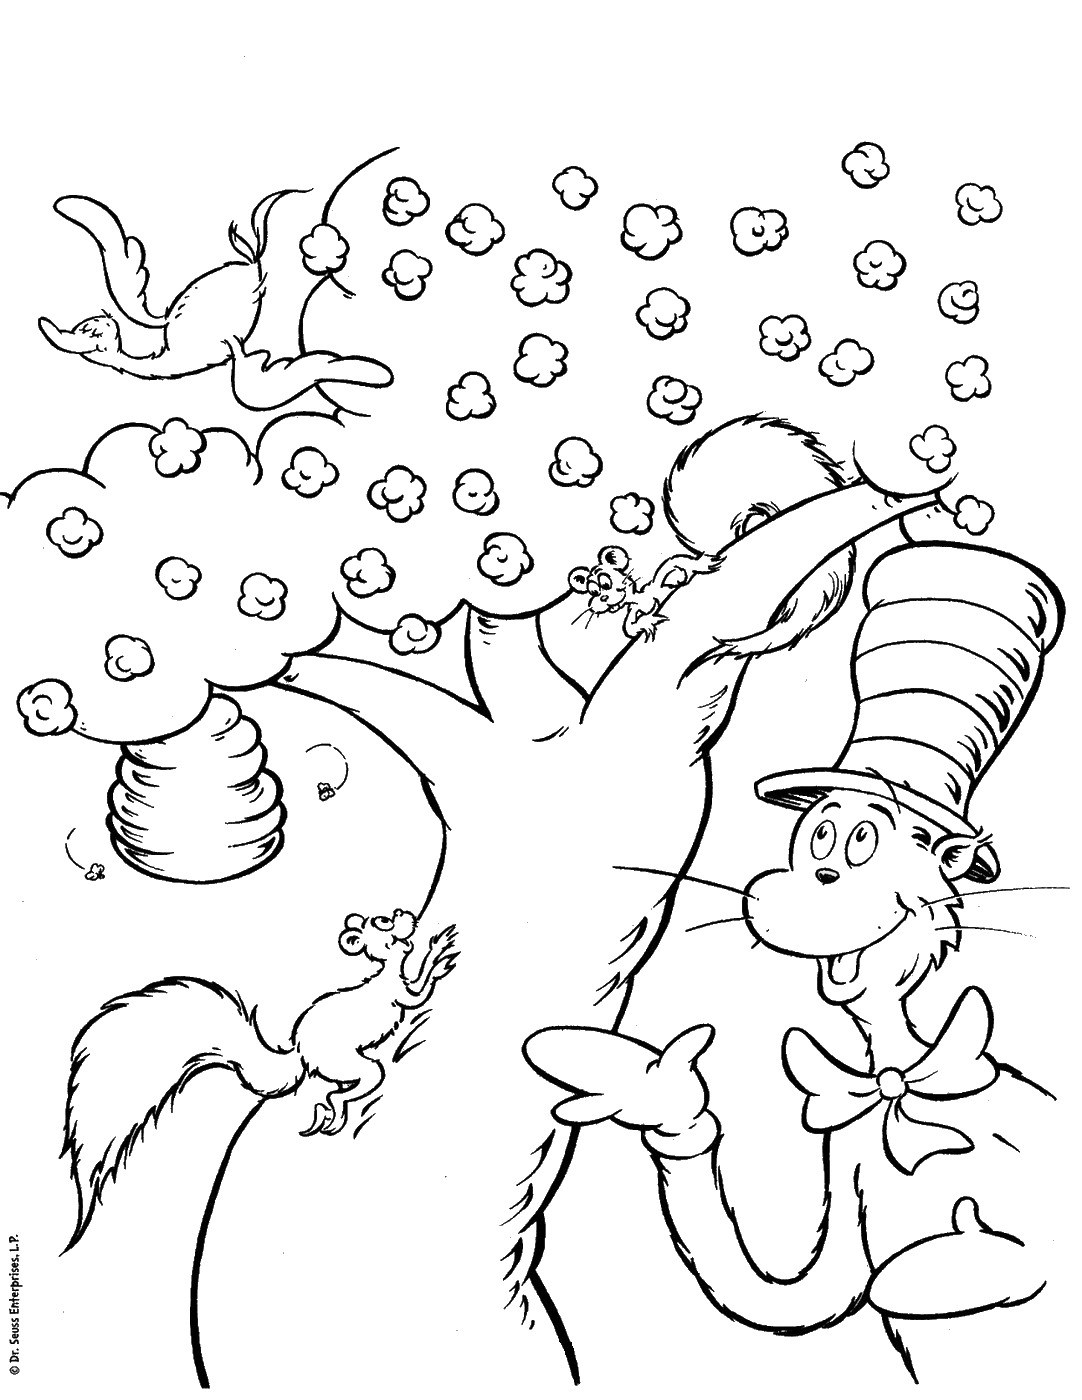 Cat In The Hat Coloring Page Coloring Pages Cat In The Hat Coloring Pages Free Printable Clrg